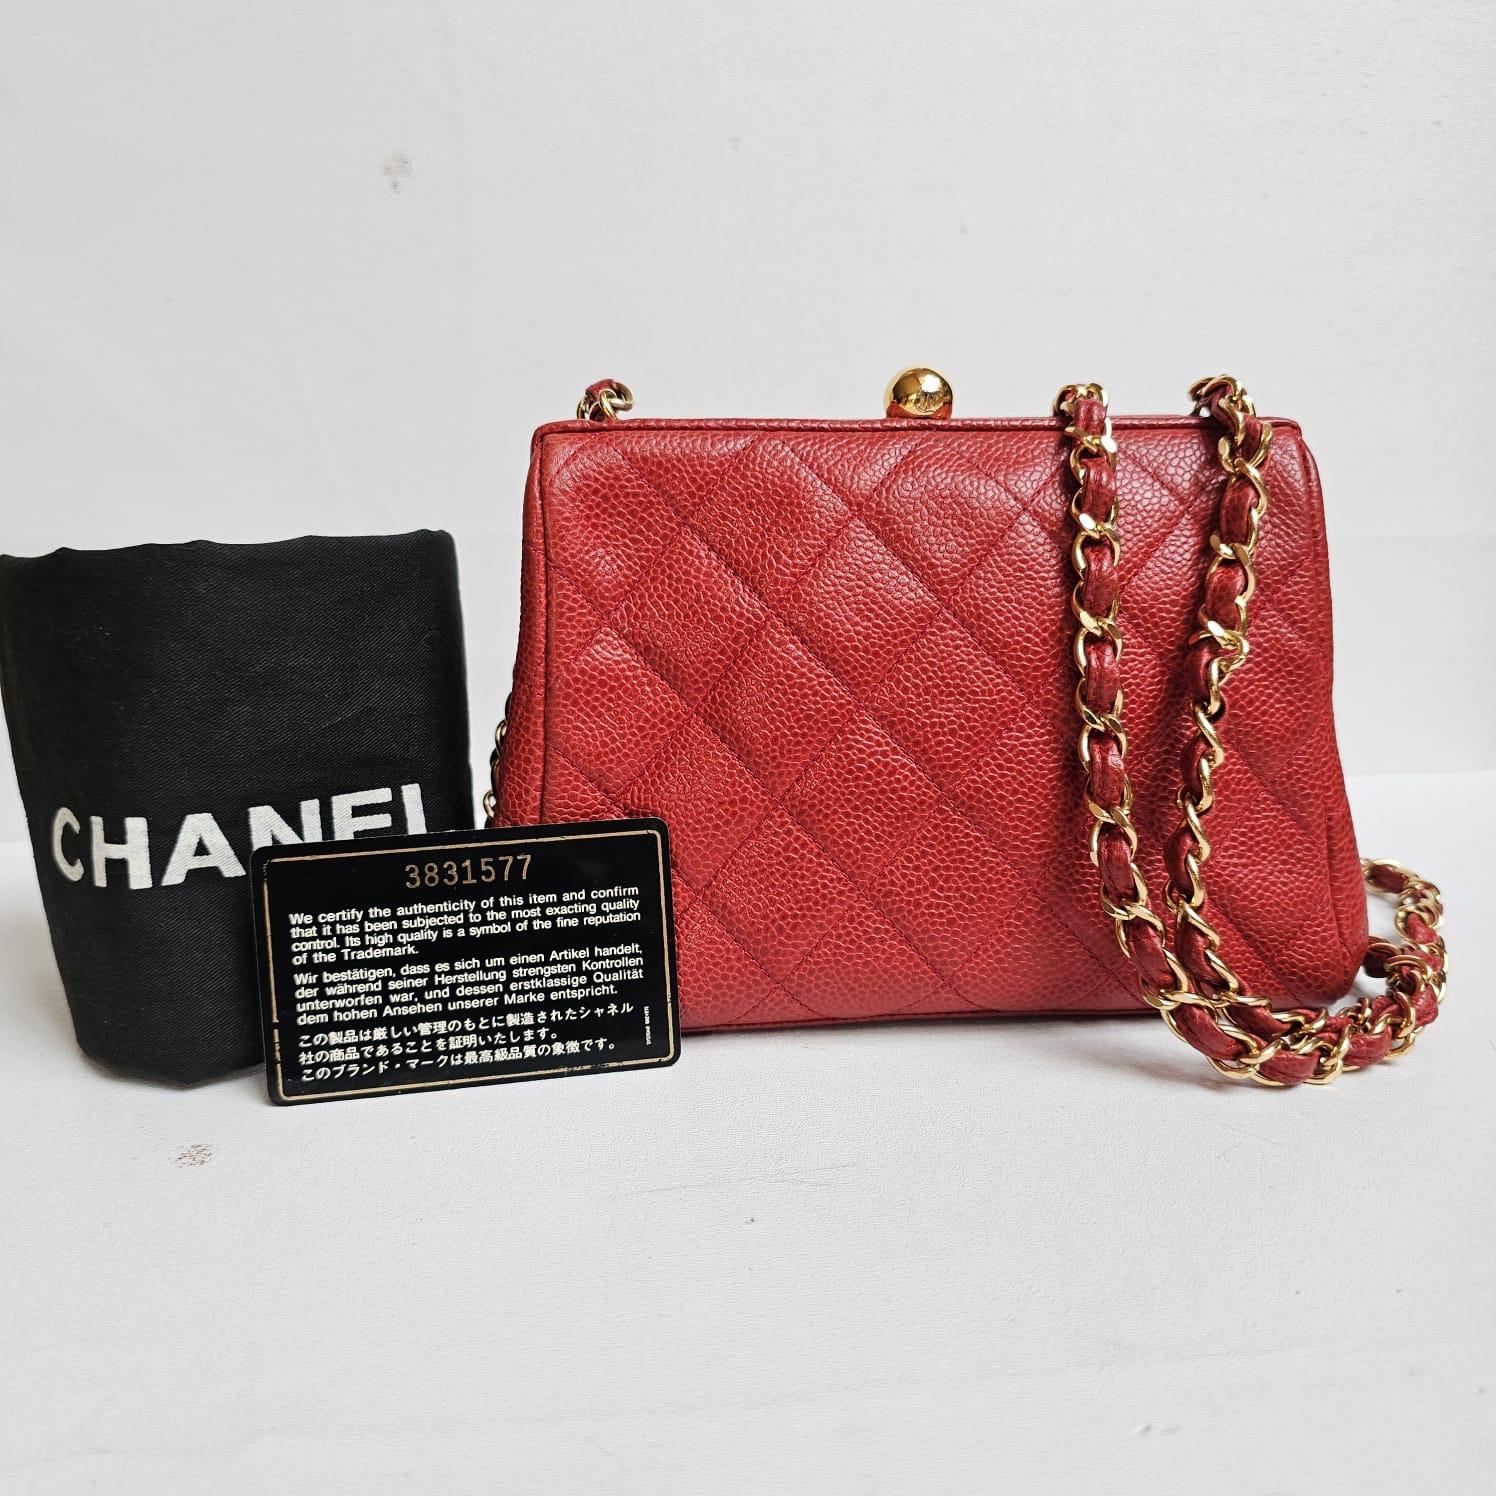 Vintage 1990s Chanel Red Caviar Quilted Mini Purse Sling Bag For Sale 16